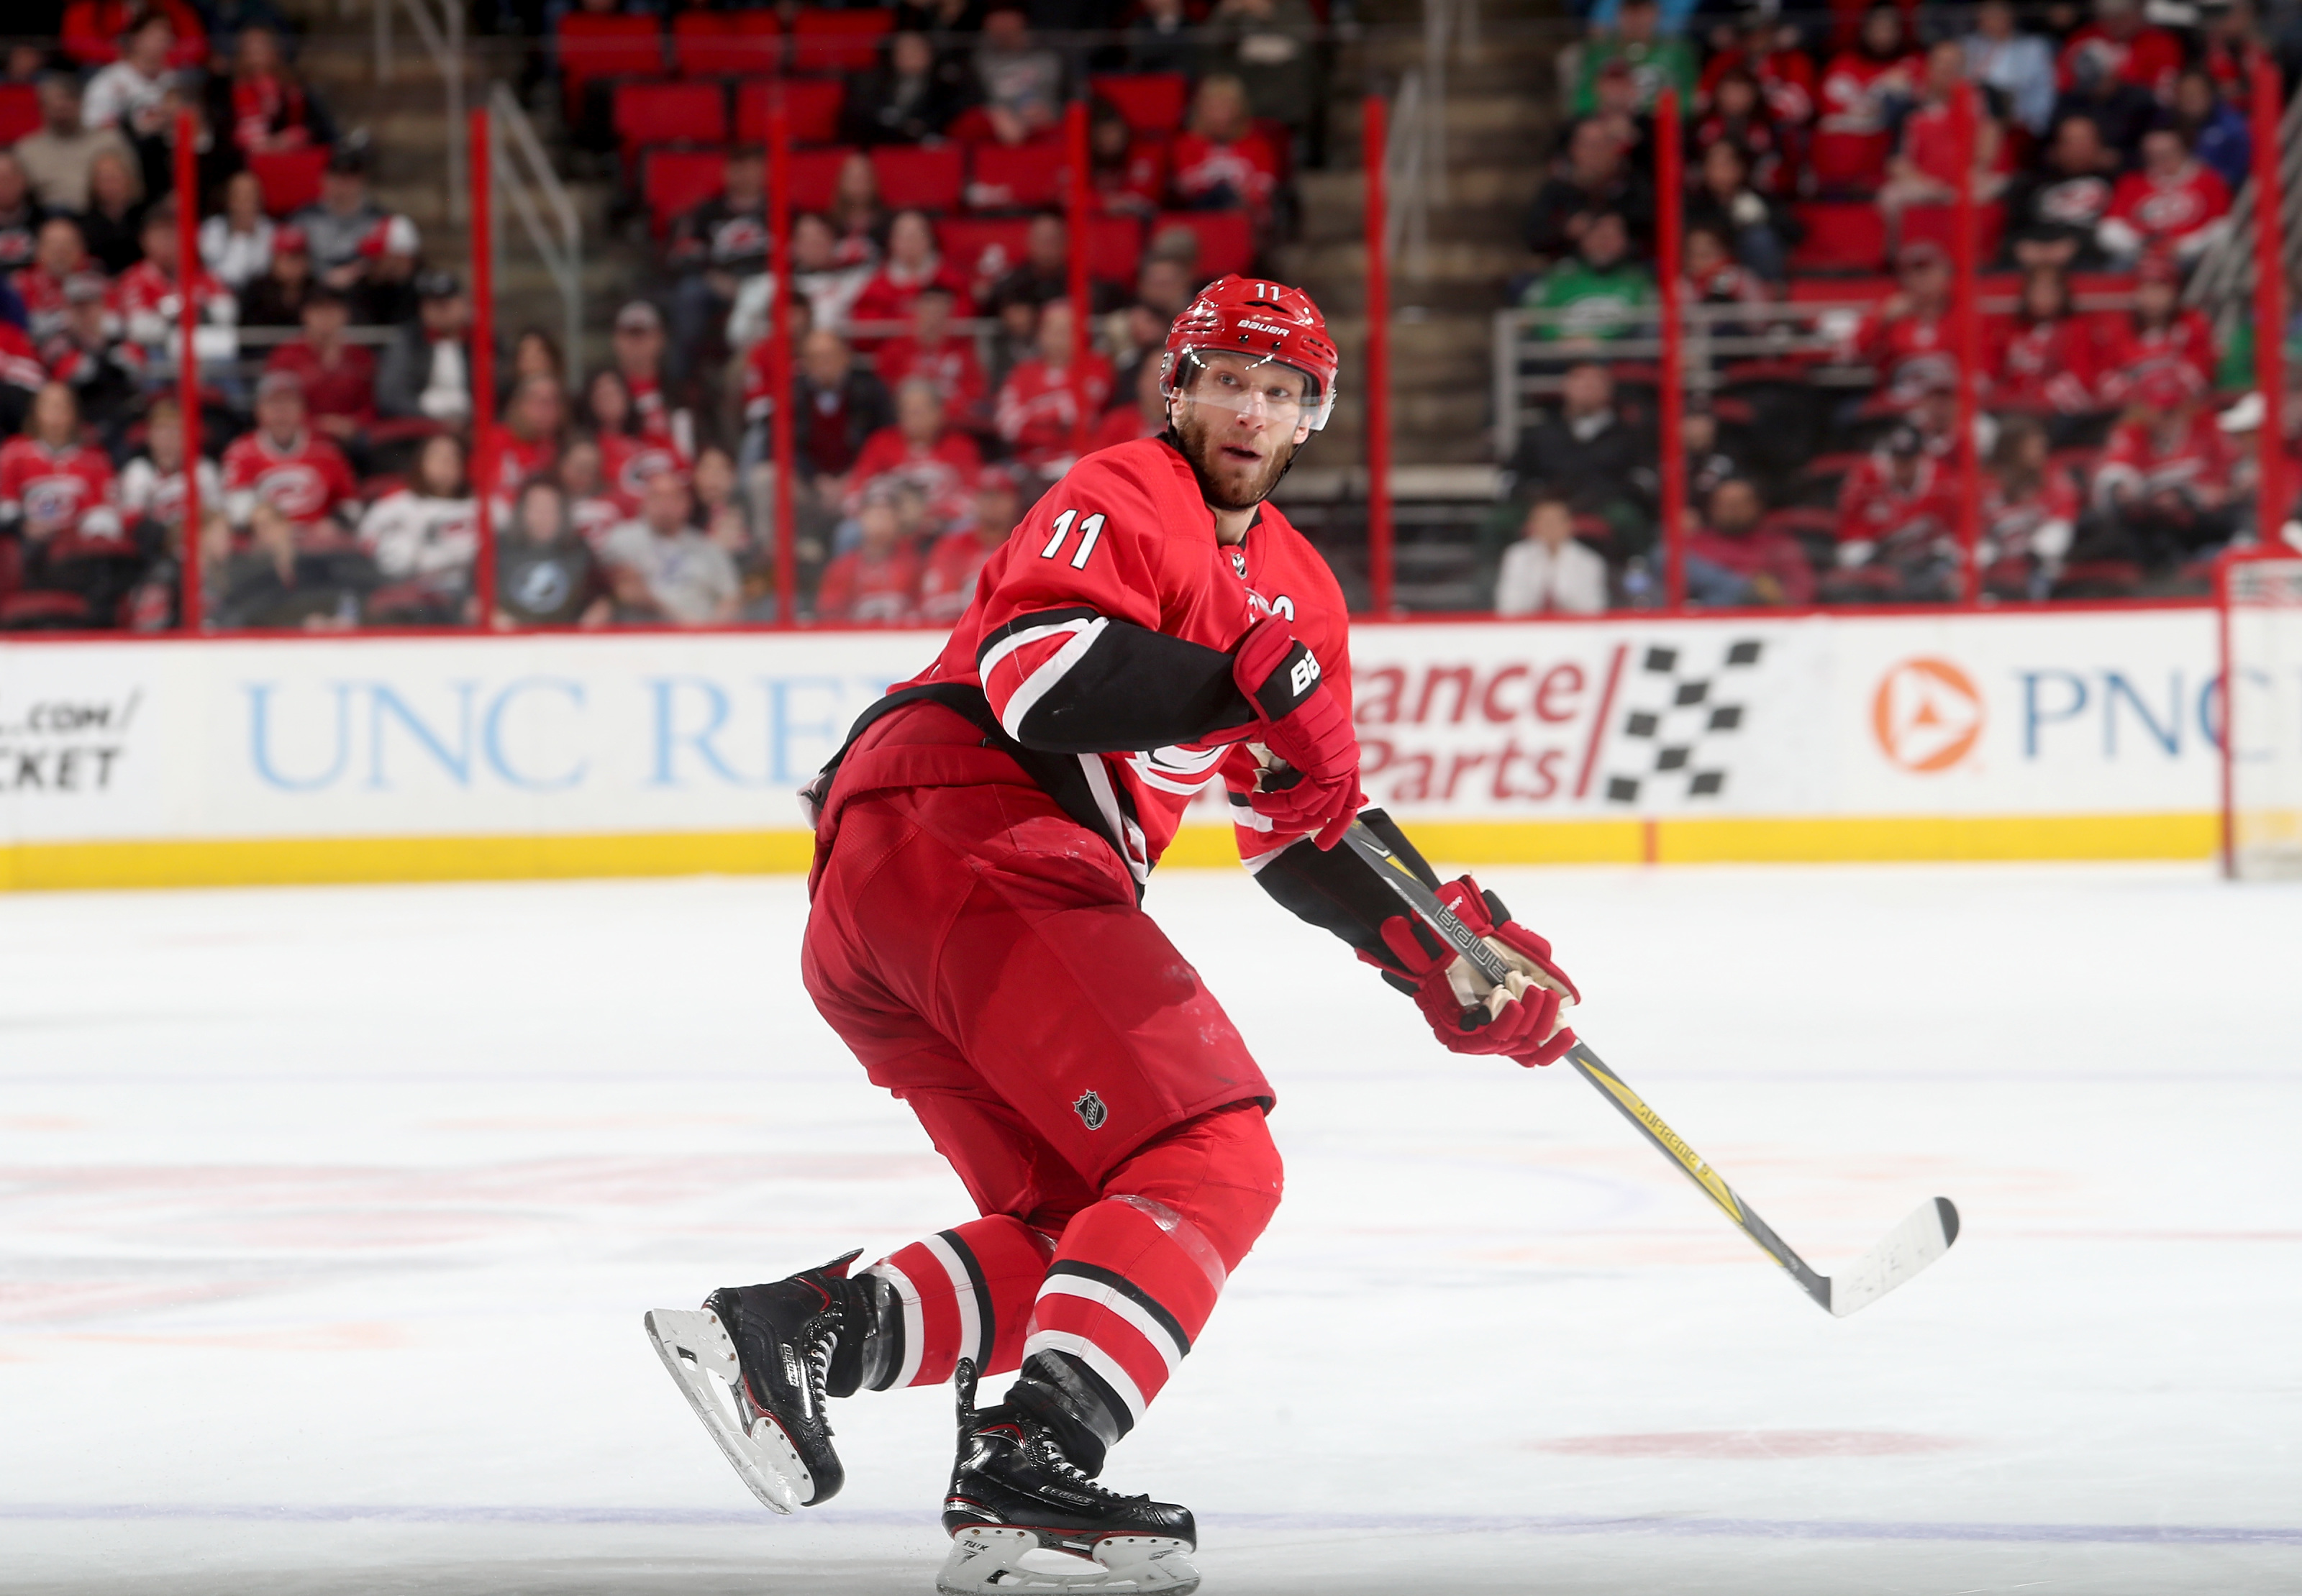 Carolina Hurricanes' Jordan Staal skates on the ice during a